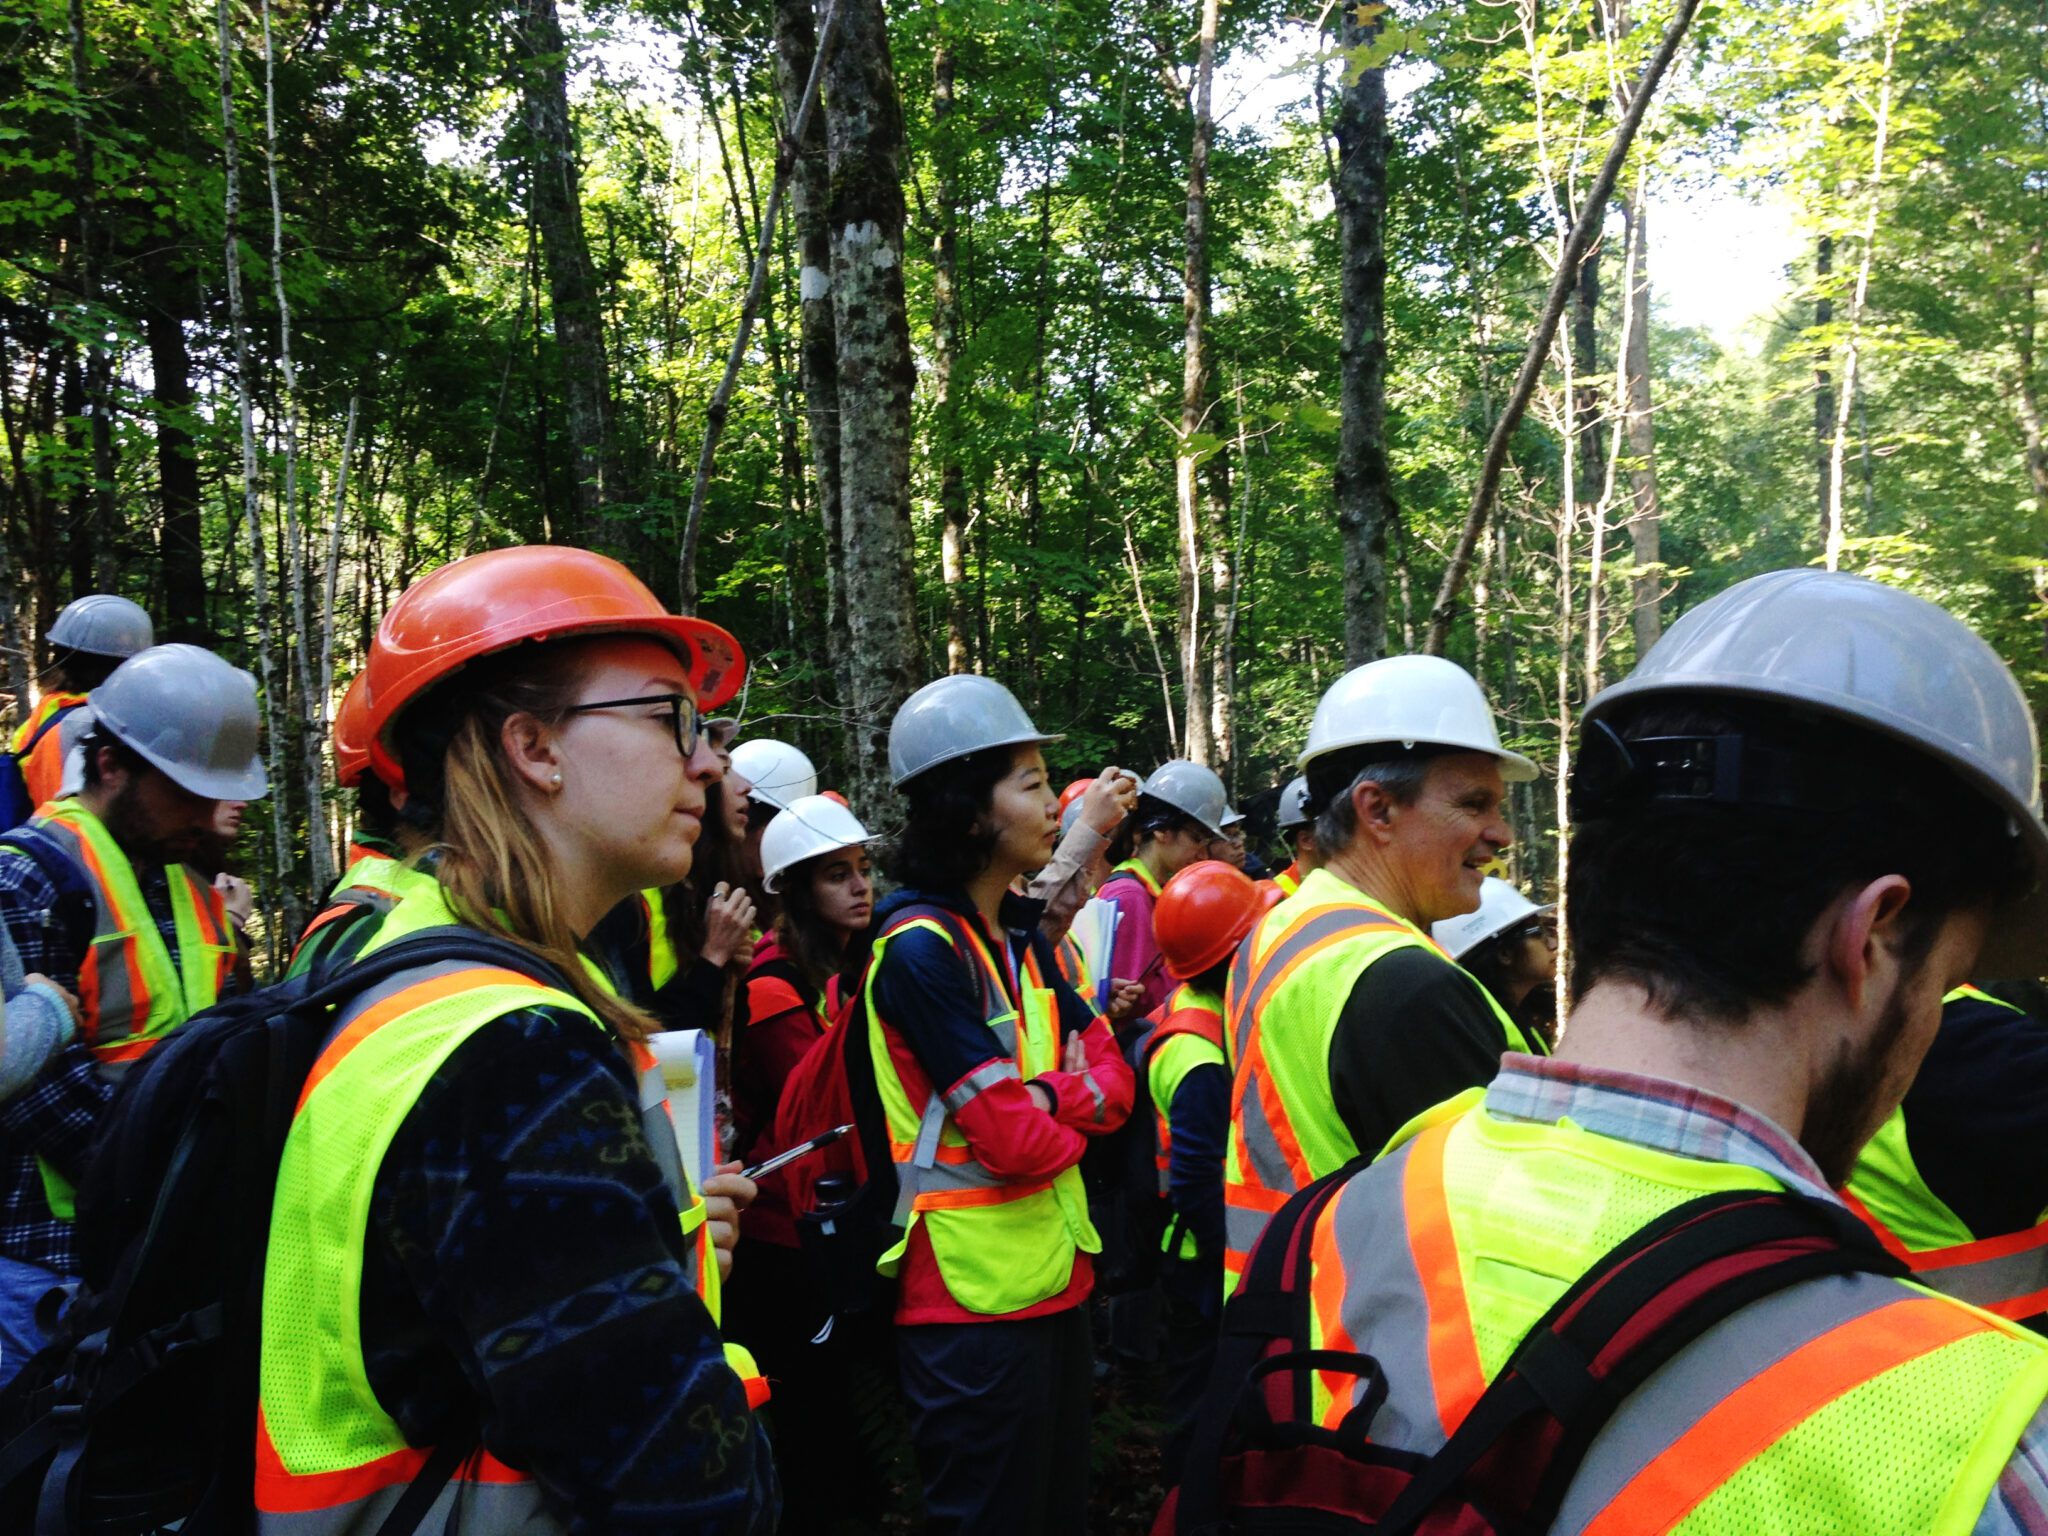  Environmental studies and forestry